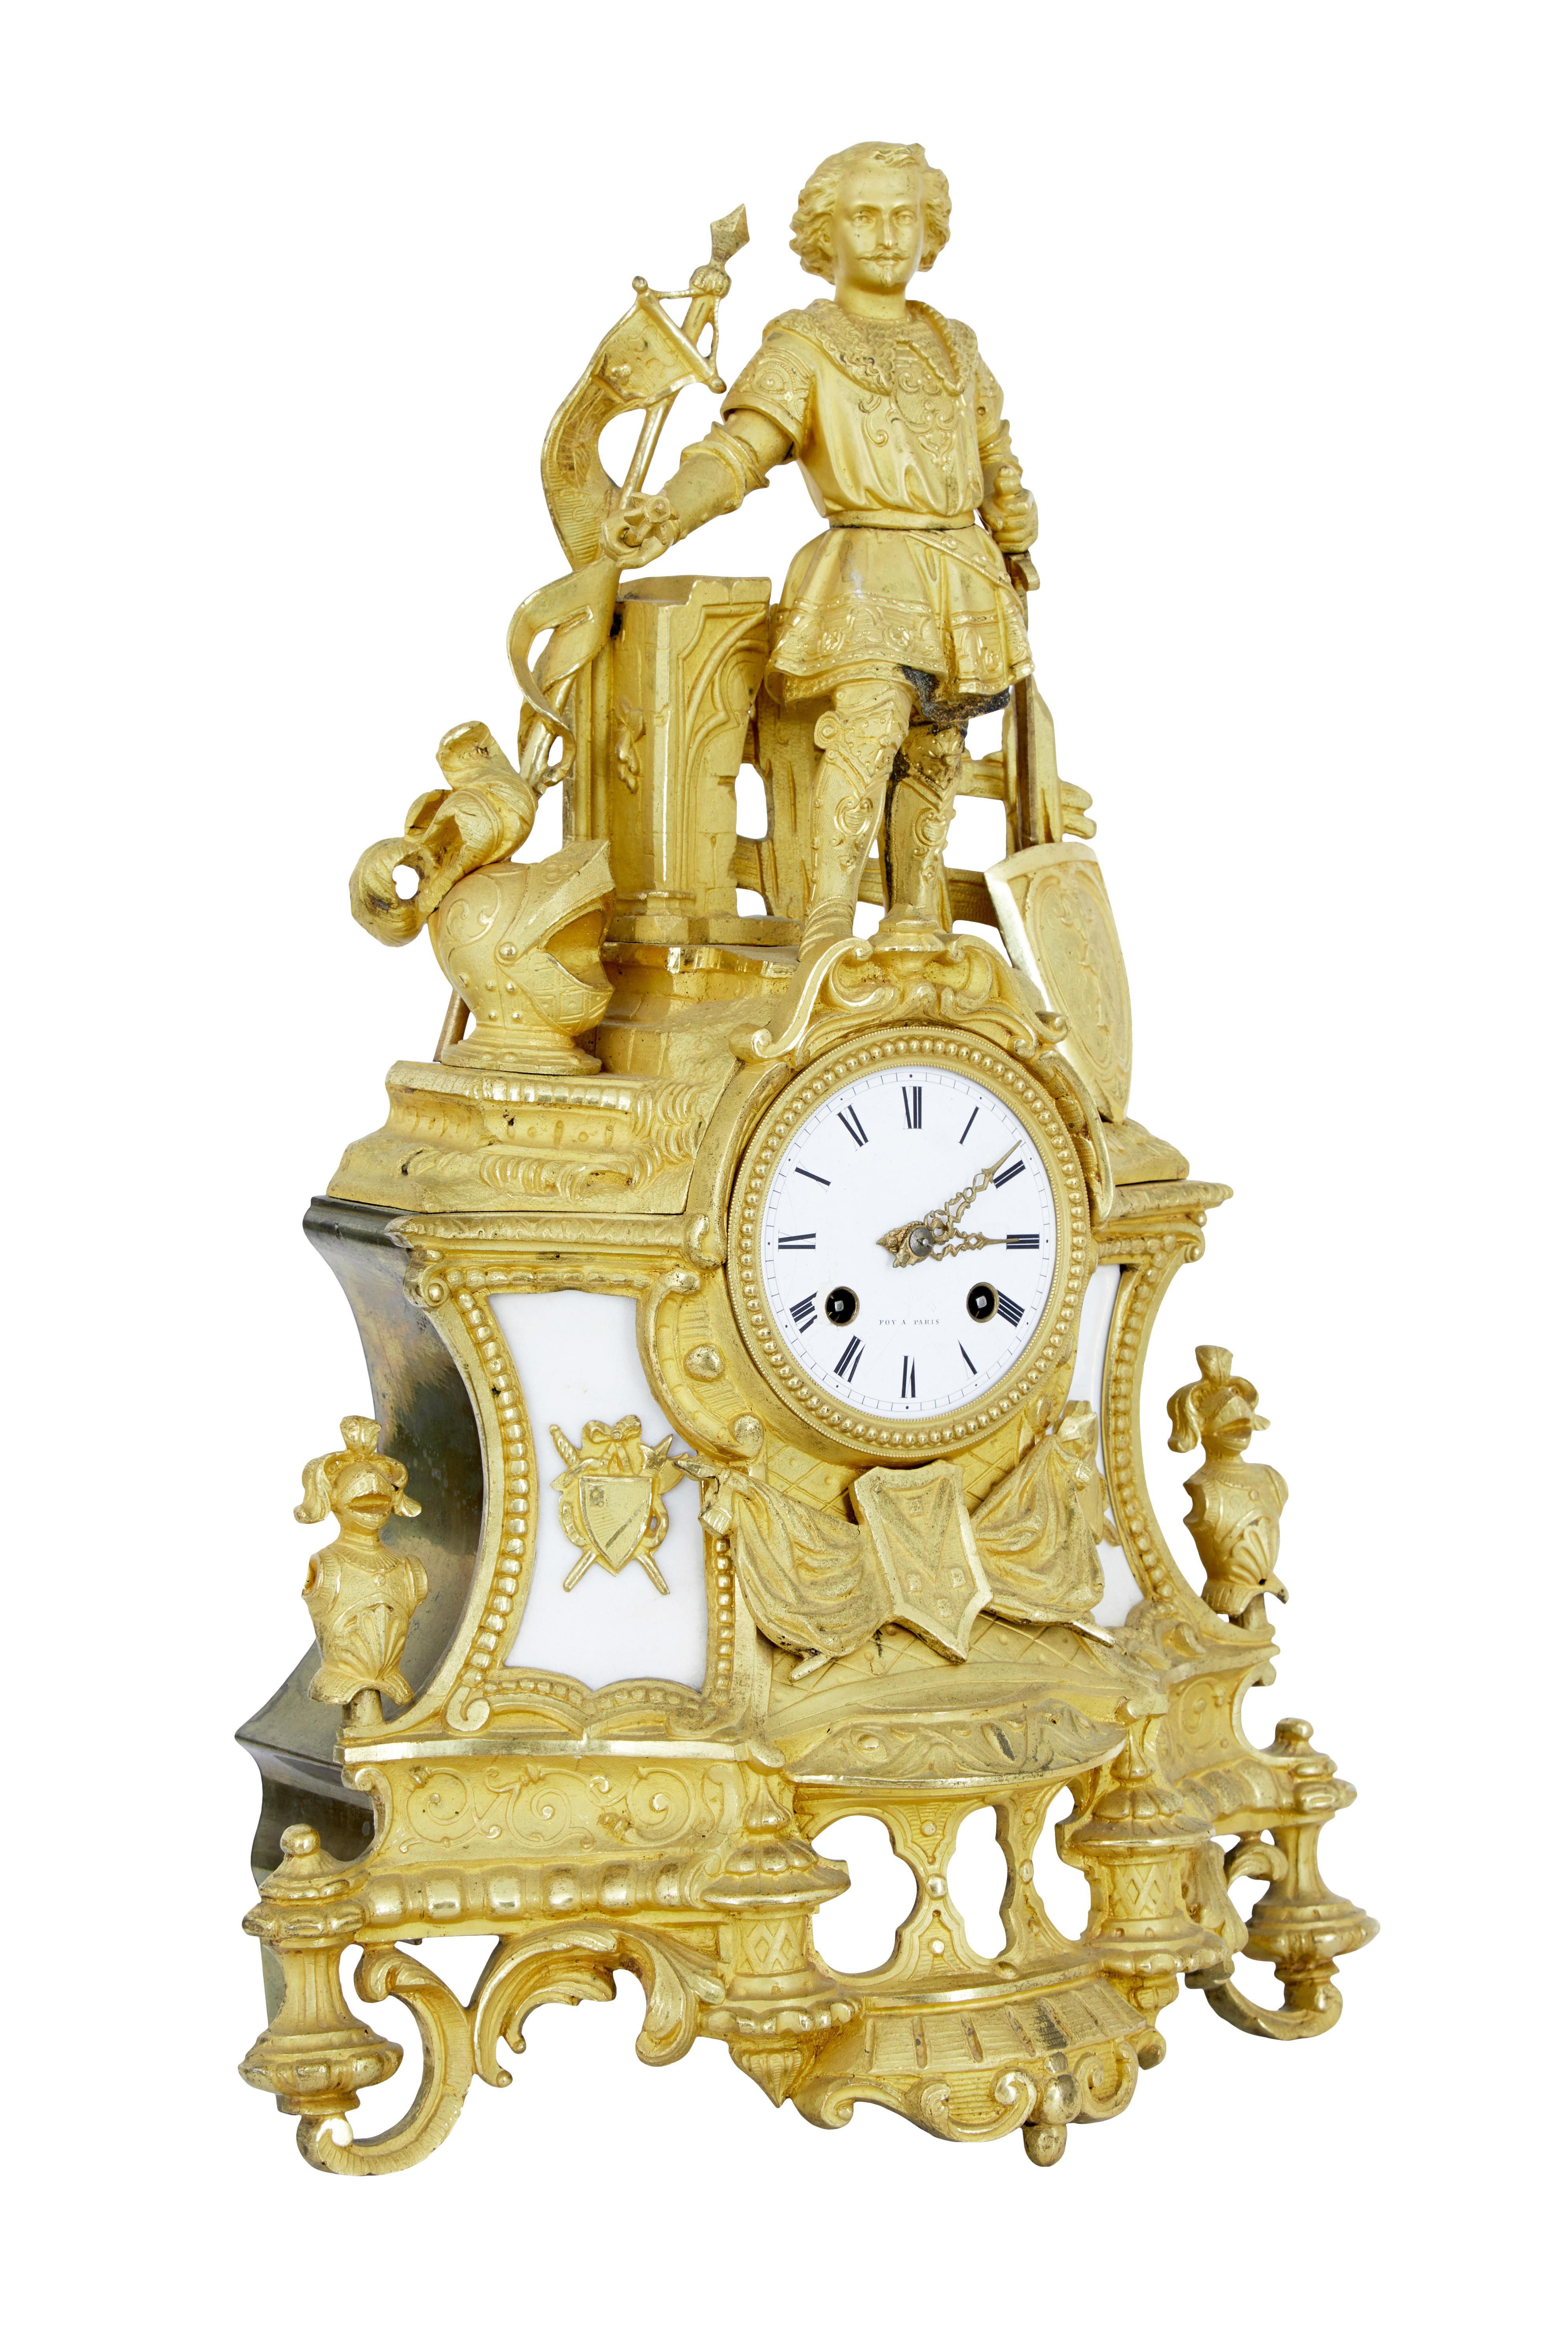 19th century ormolu and marble figural mantel clock, circa 1870.

Parisian made mantel clock with 'foy a paris' marked on the white enamel clock face. Military themed clock with figure holding a sword and mace and various armorial plaques and